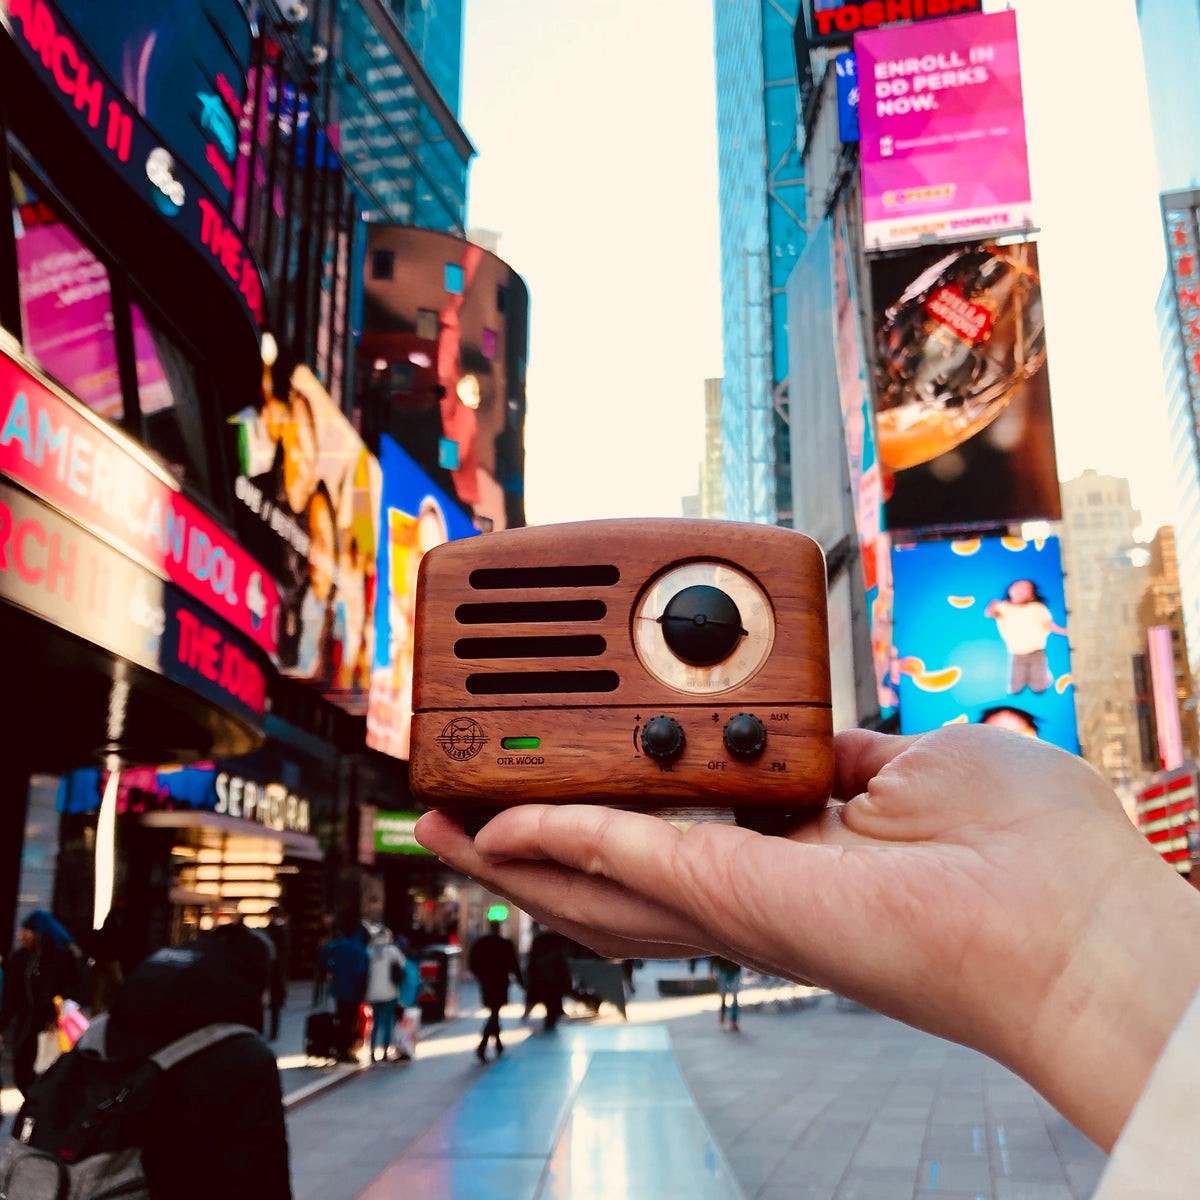 The Benefits of Portable FM Radios in the Digital Age